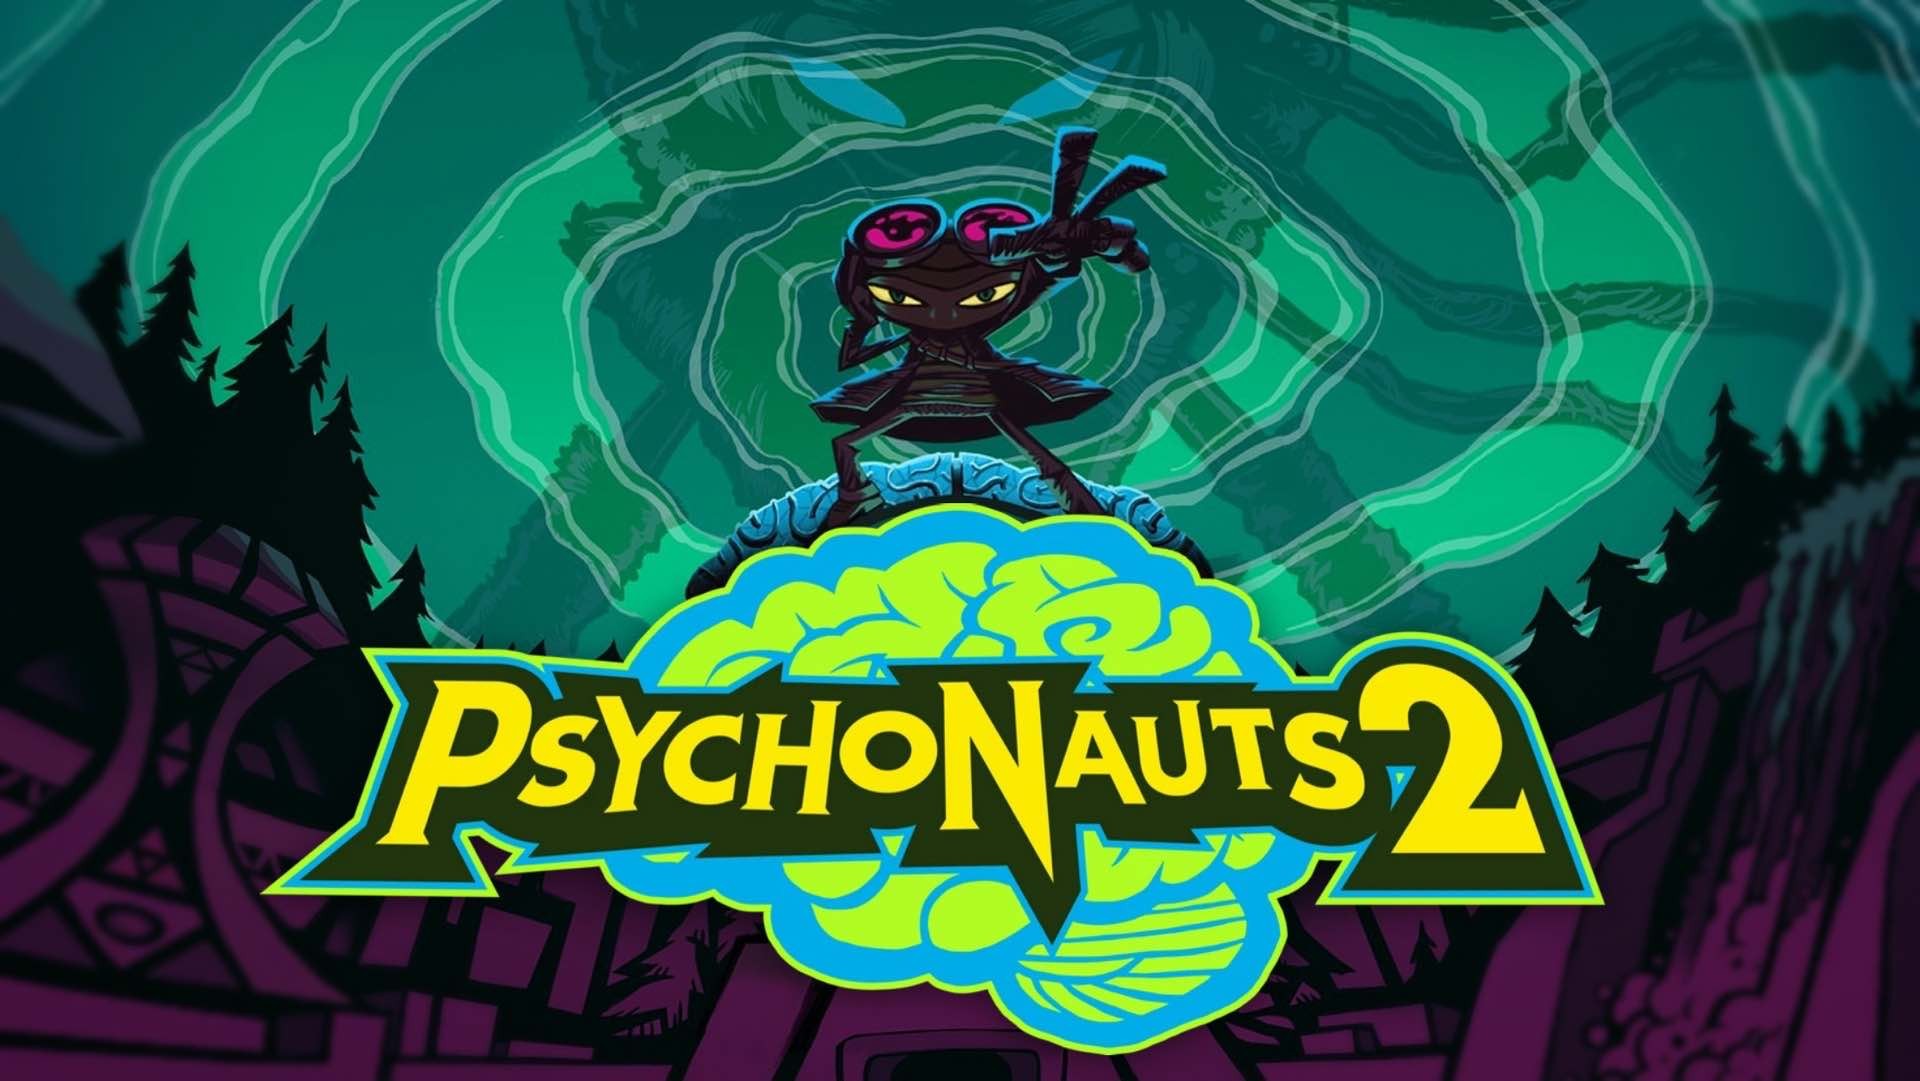 ‘Psychonauts 2’ for Xbox, PS4, and PC